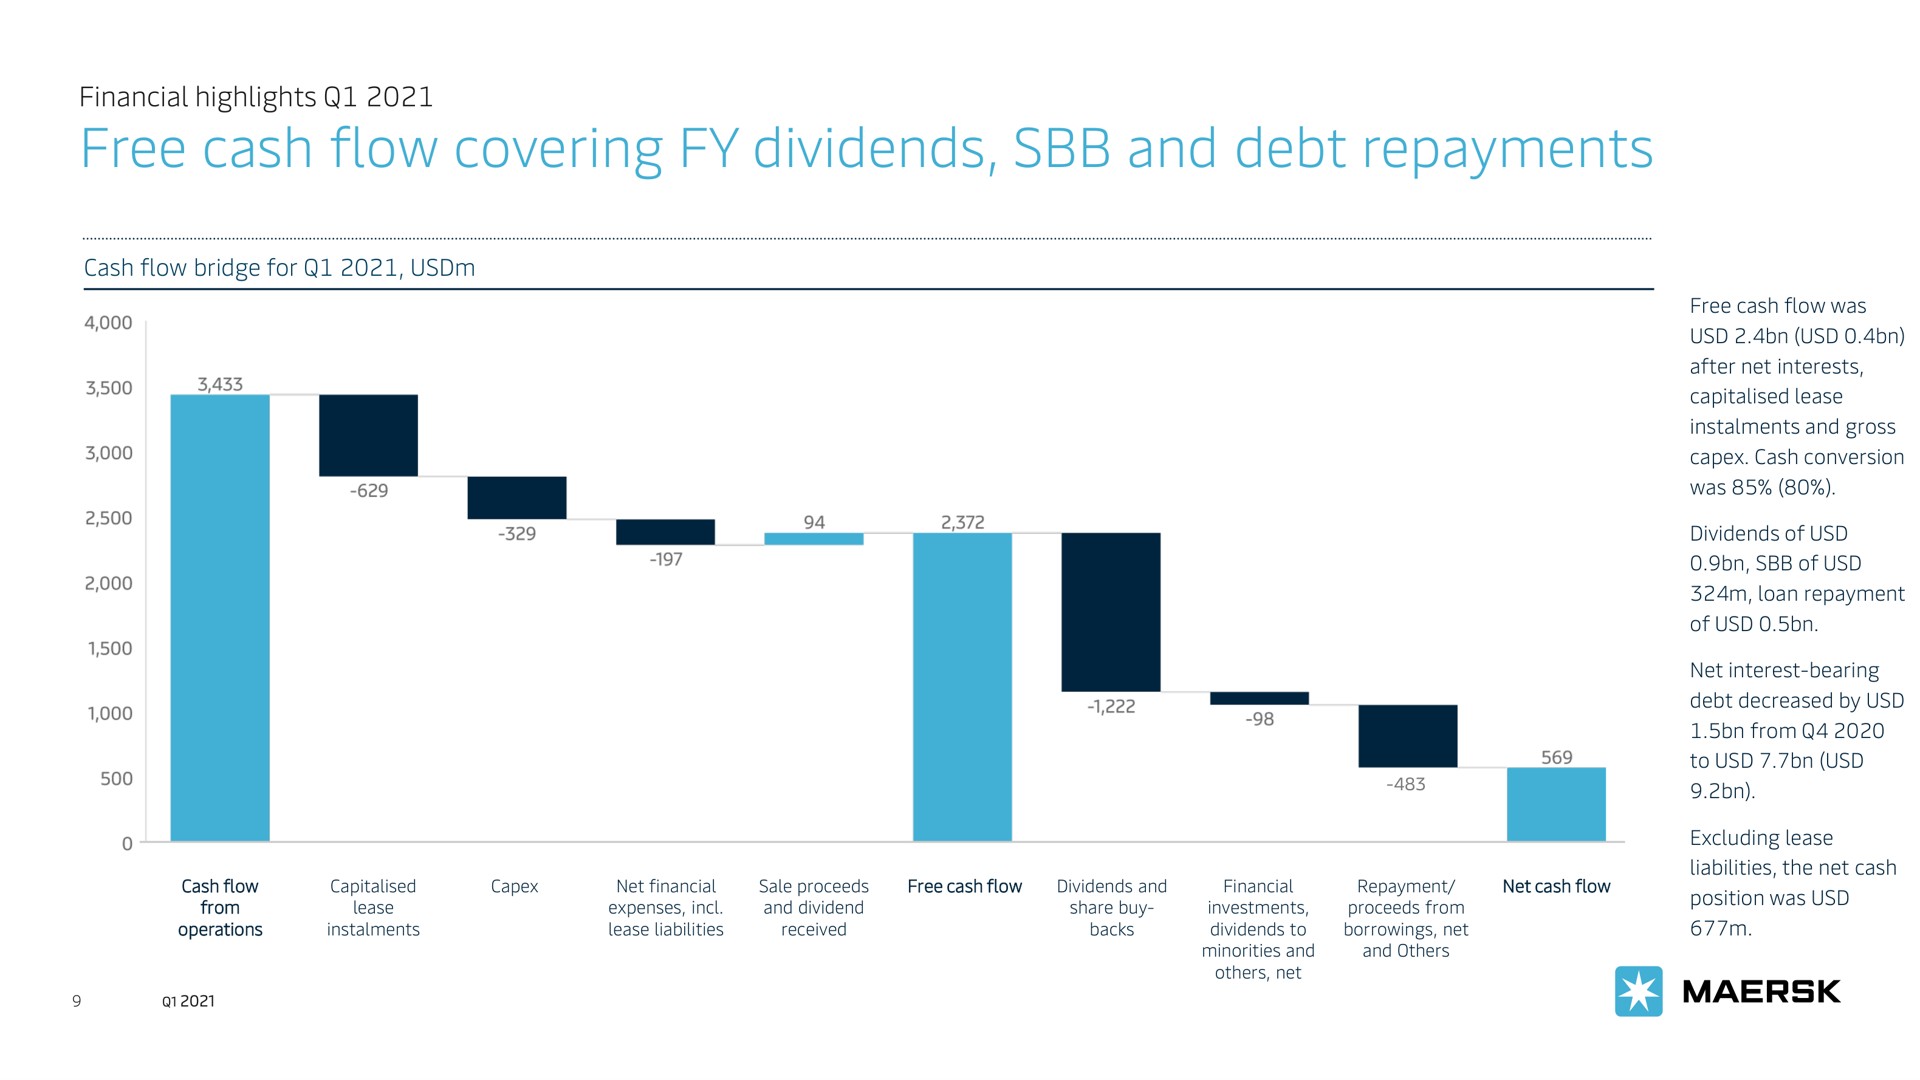 free cash flow covering dividends and debt repayments | Maersk